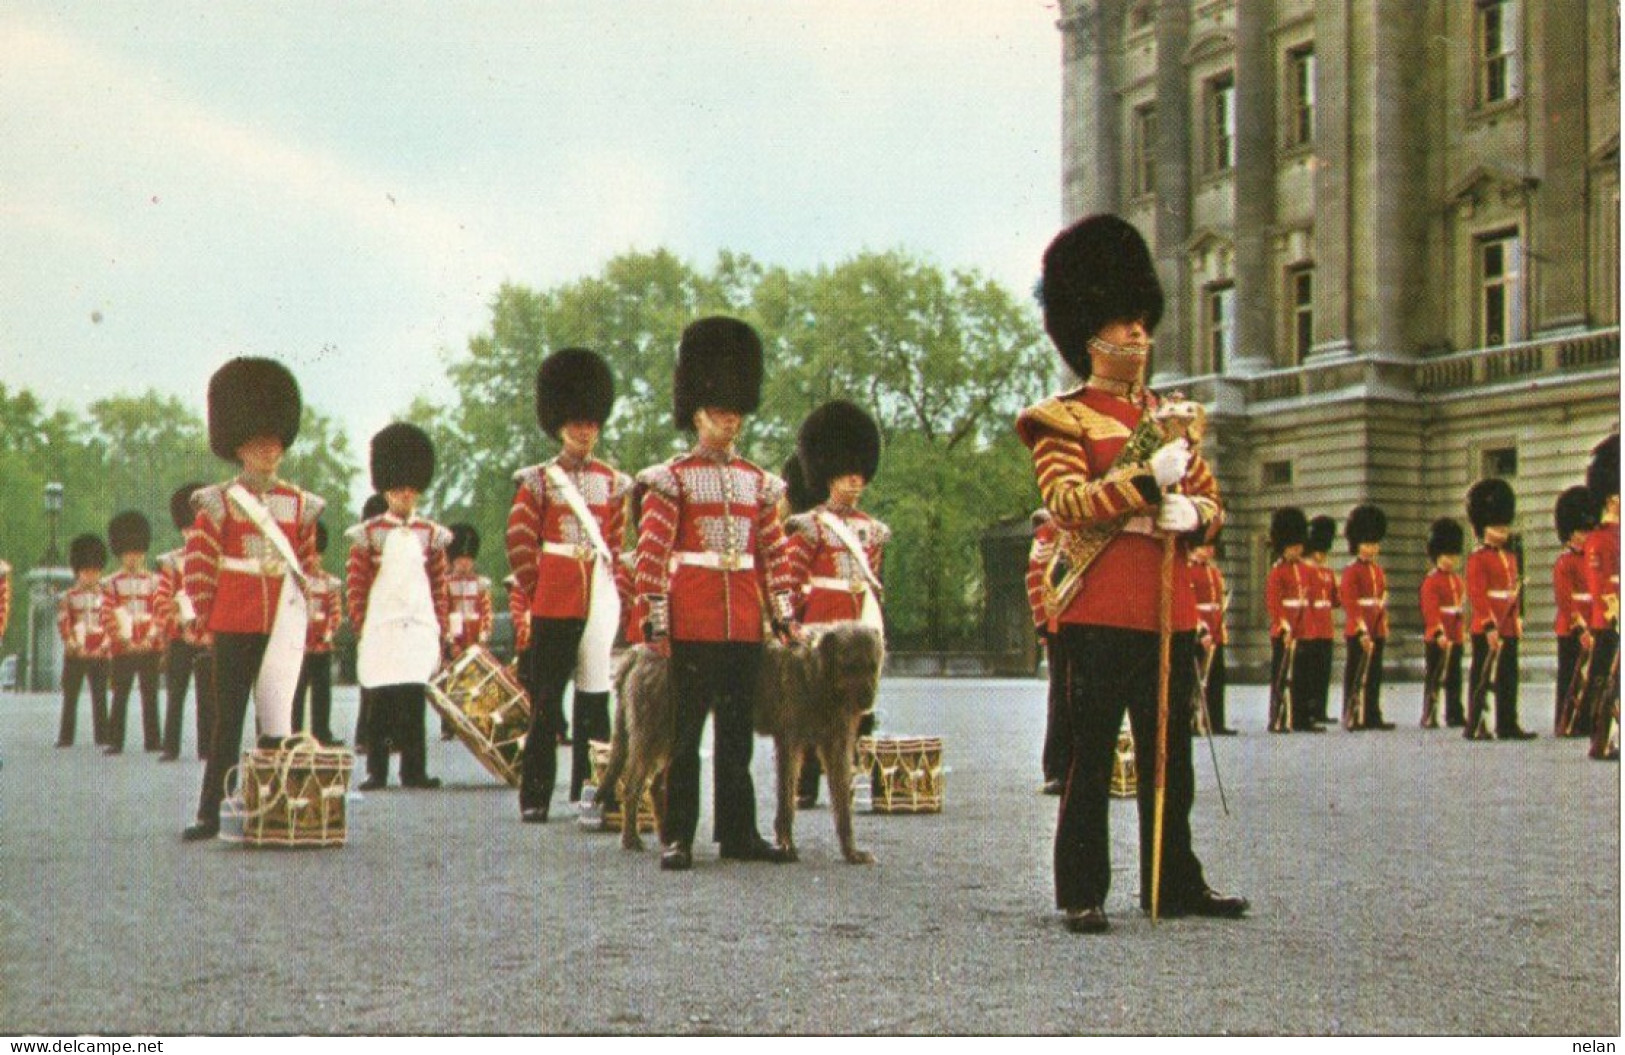 THE CORPS OF DRUMS - Buckingham Palace